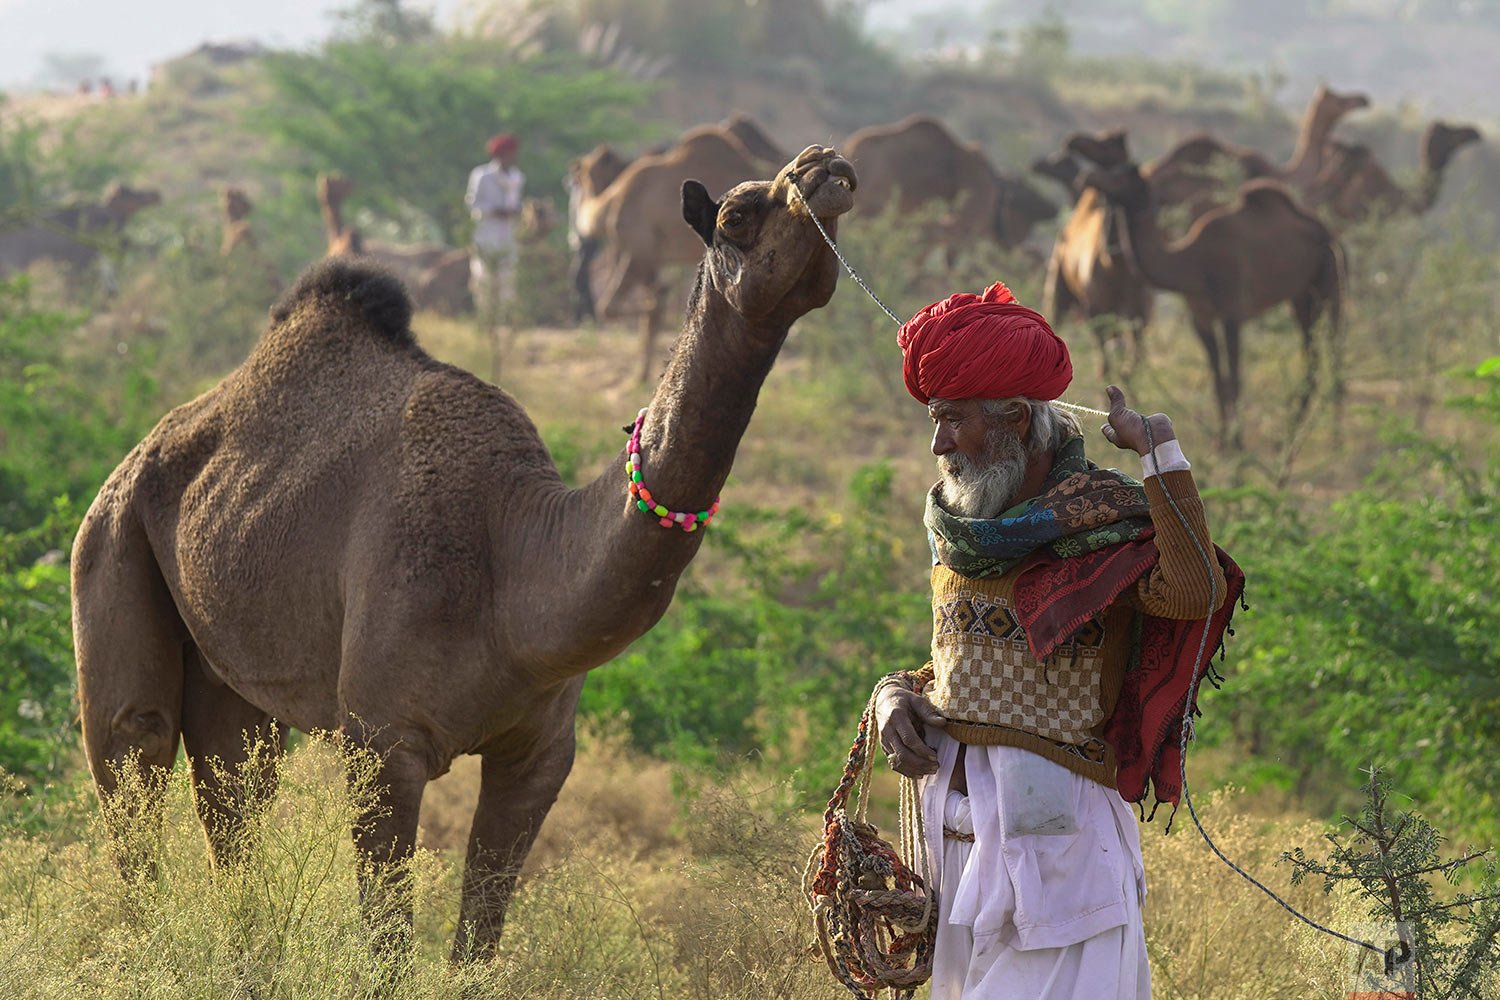  A camel herder walks with his camel at the annual cattle fair in Pushkar, in the western Indian state of Rajasthan, Thursday, Nov. 11, 2021. (AP Photo/Deepak Sharma) 